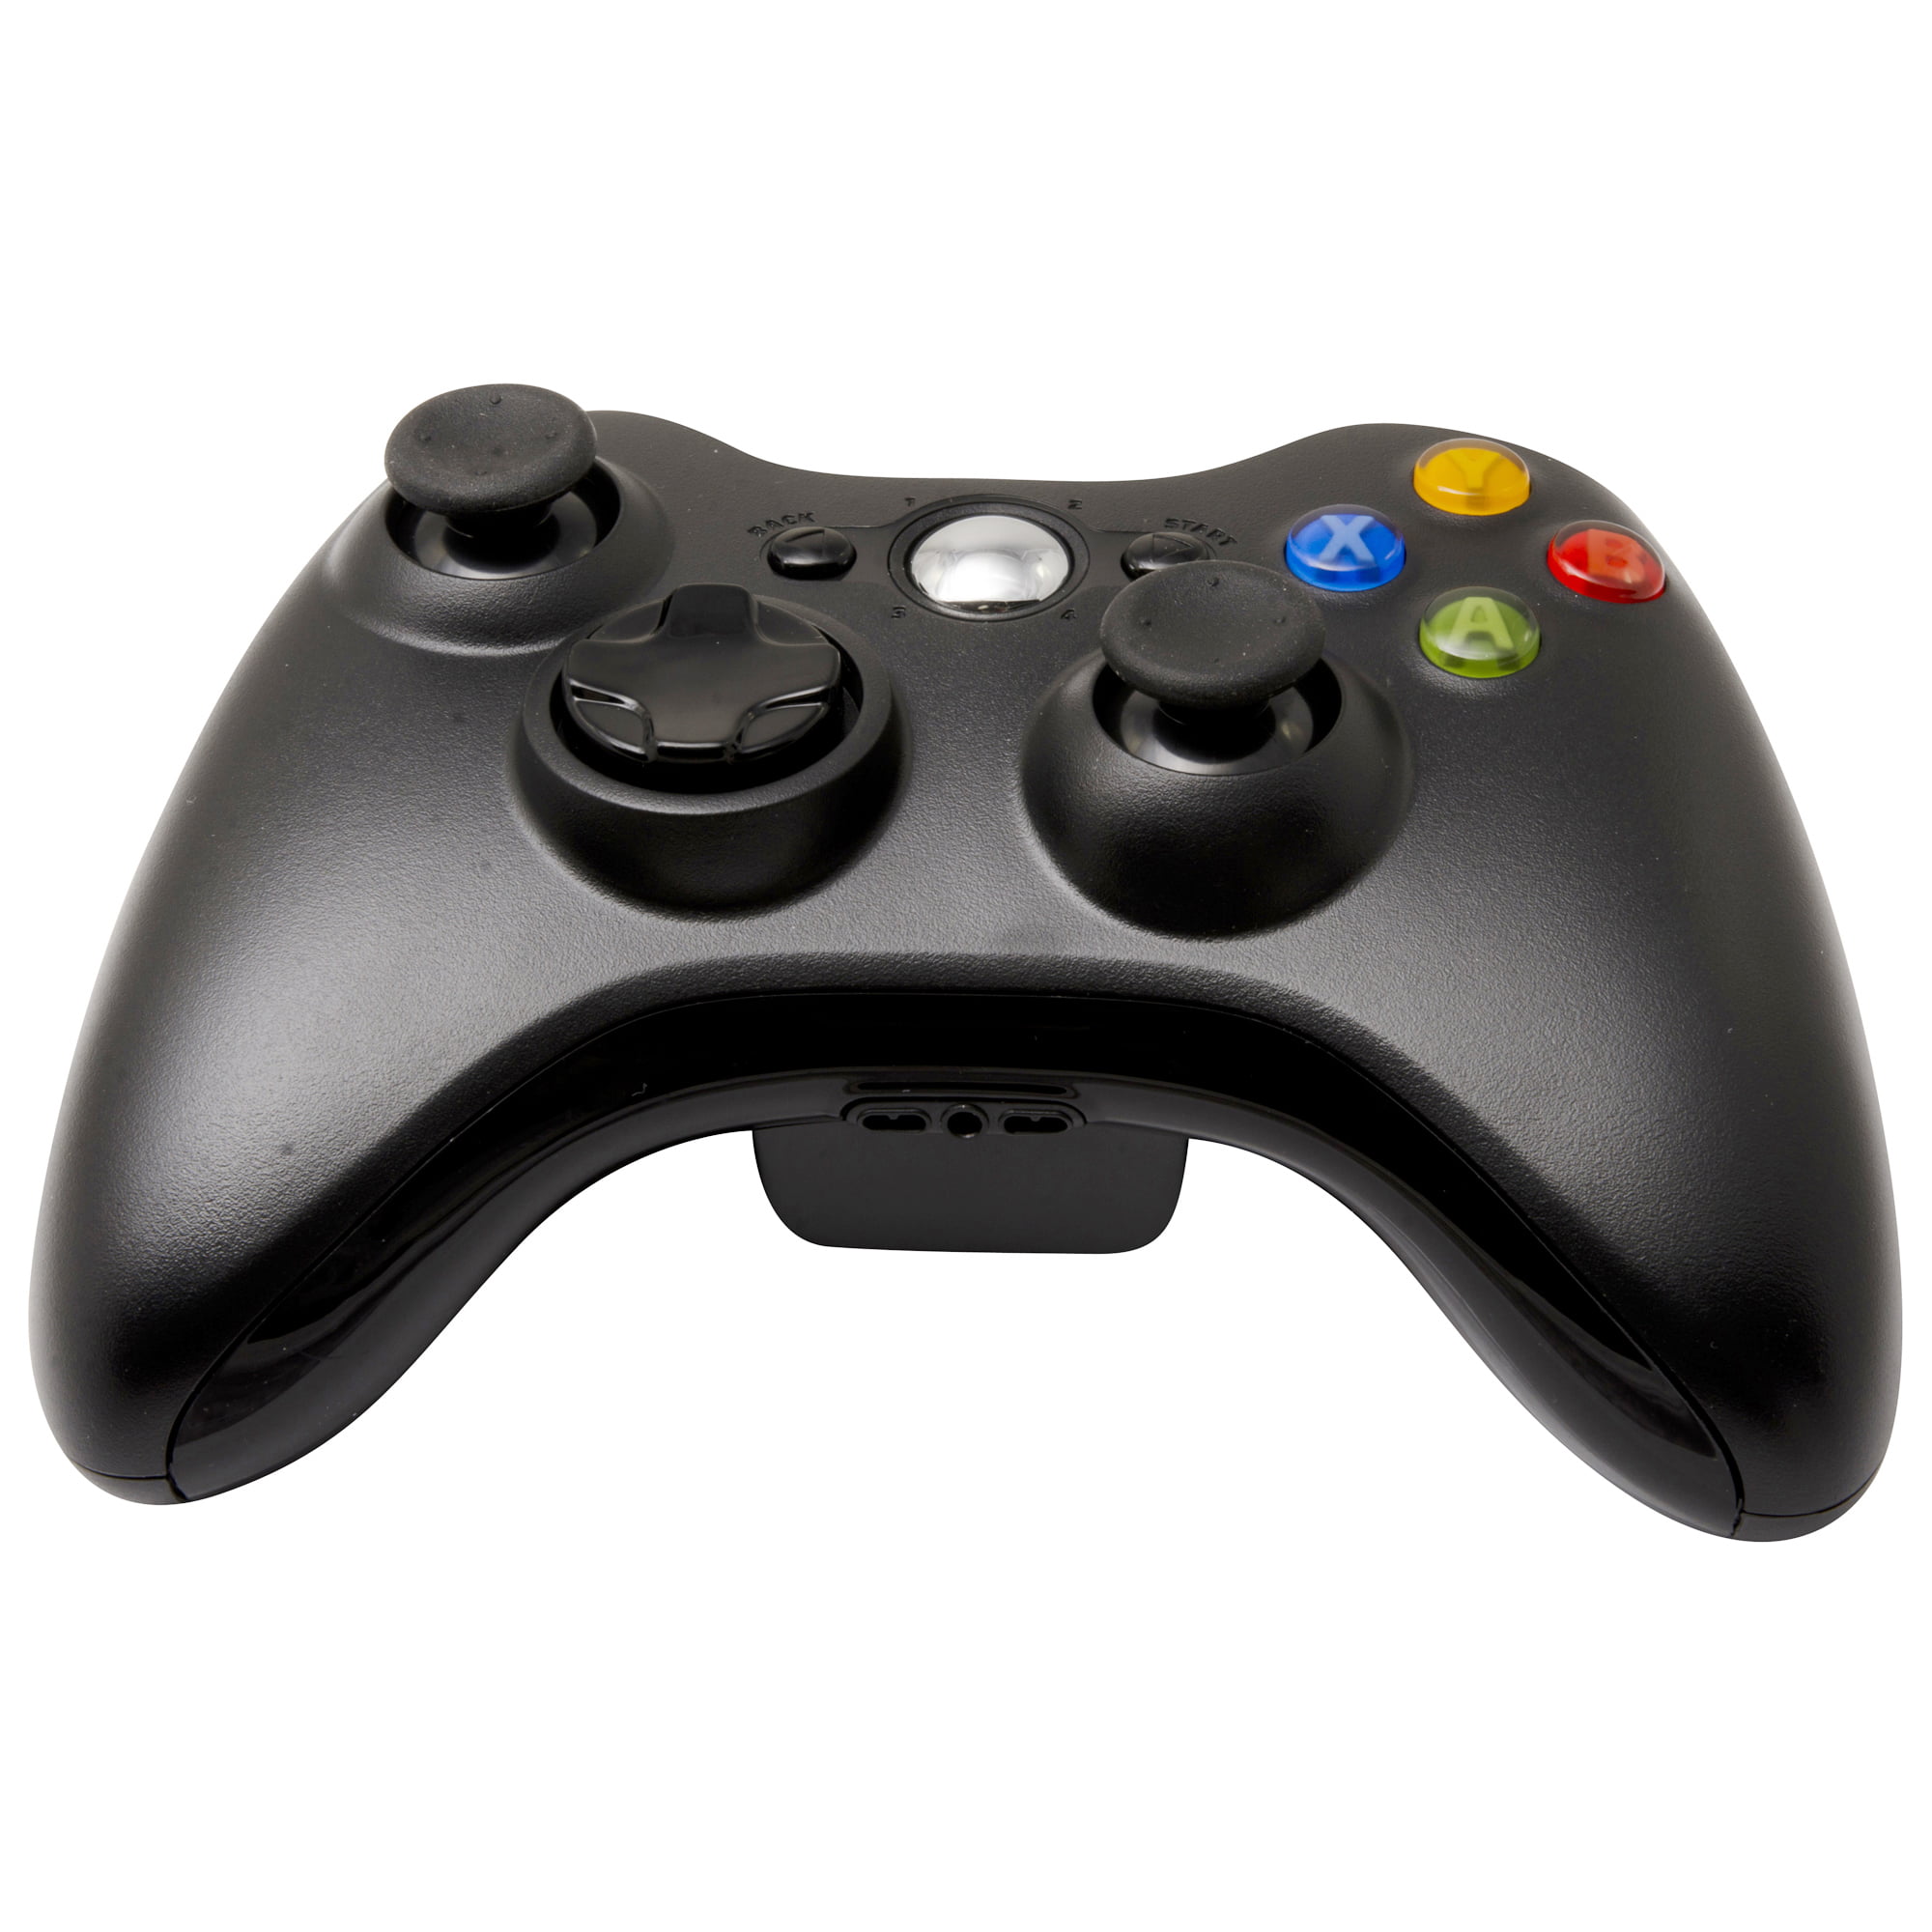 Generic Xbox 360 Wireless Controller - Universal Rechargeable Remote ...